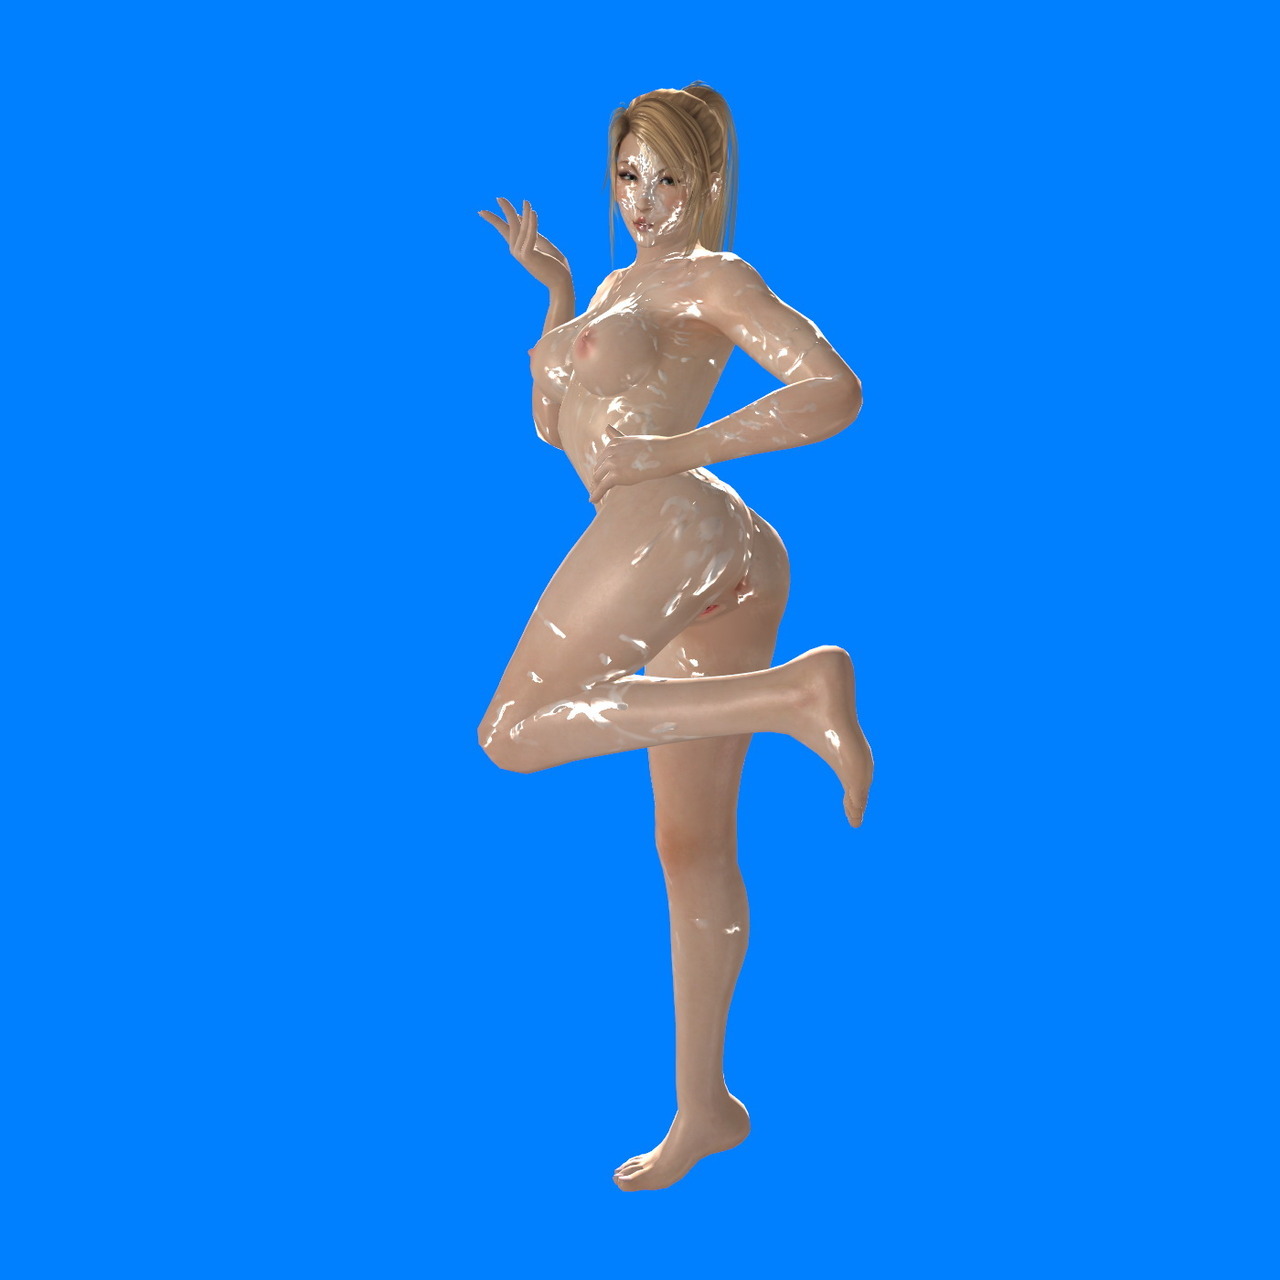 nyktonpair: NUDE DOA5 SARAH BRYANT WITH 2 SIDED UVW for your filthy needs PSD included.